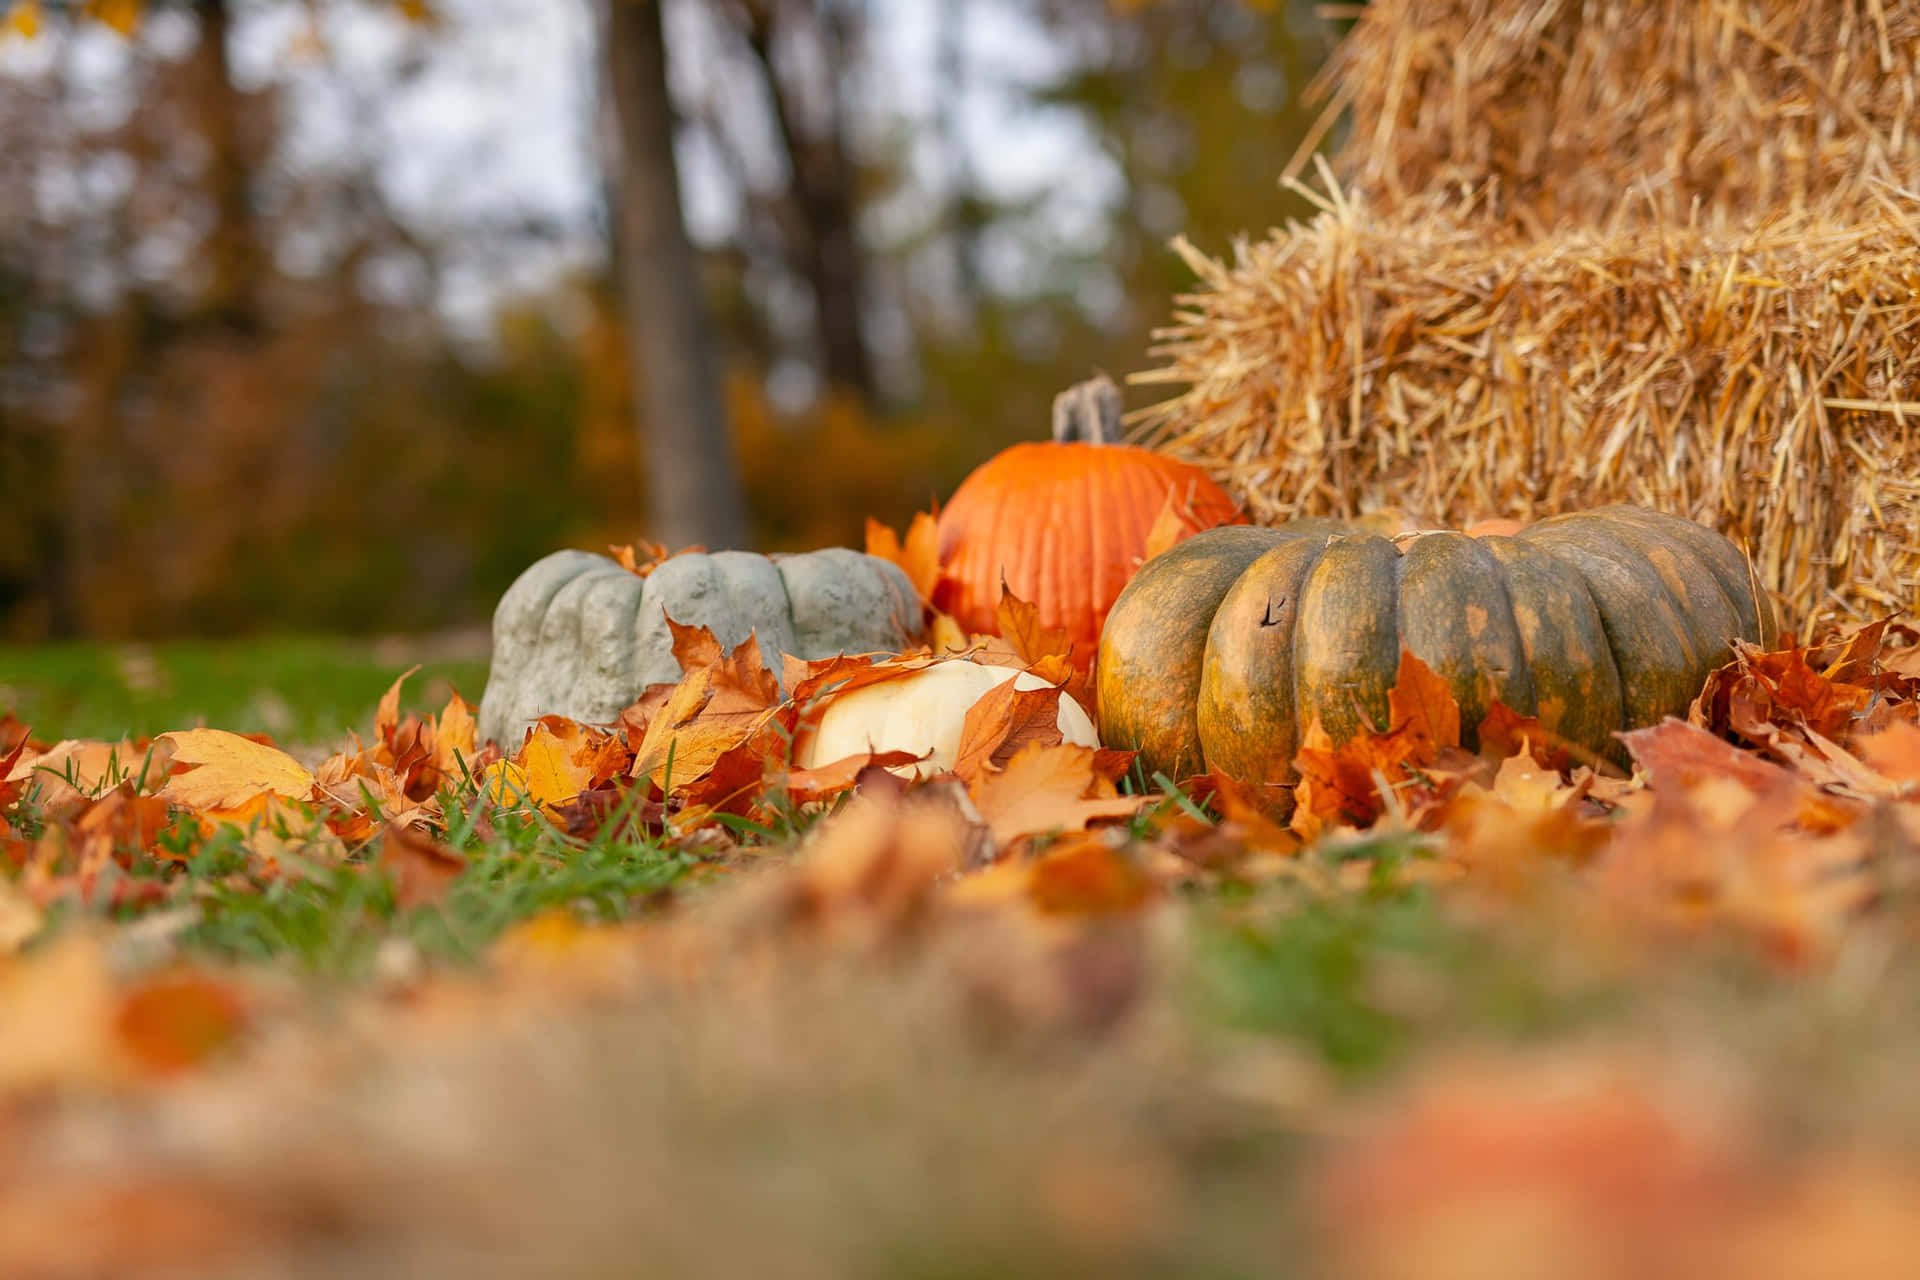 Thanksgiving Zoom Background Pumpkins Dried Leaves Outdoor Setting